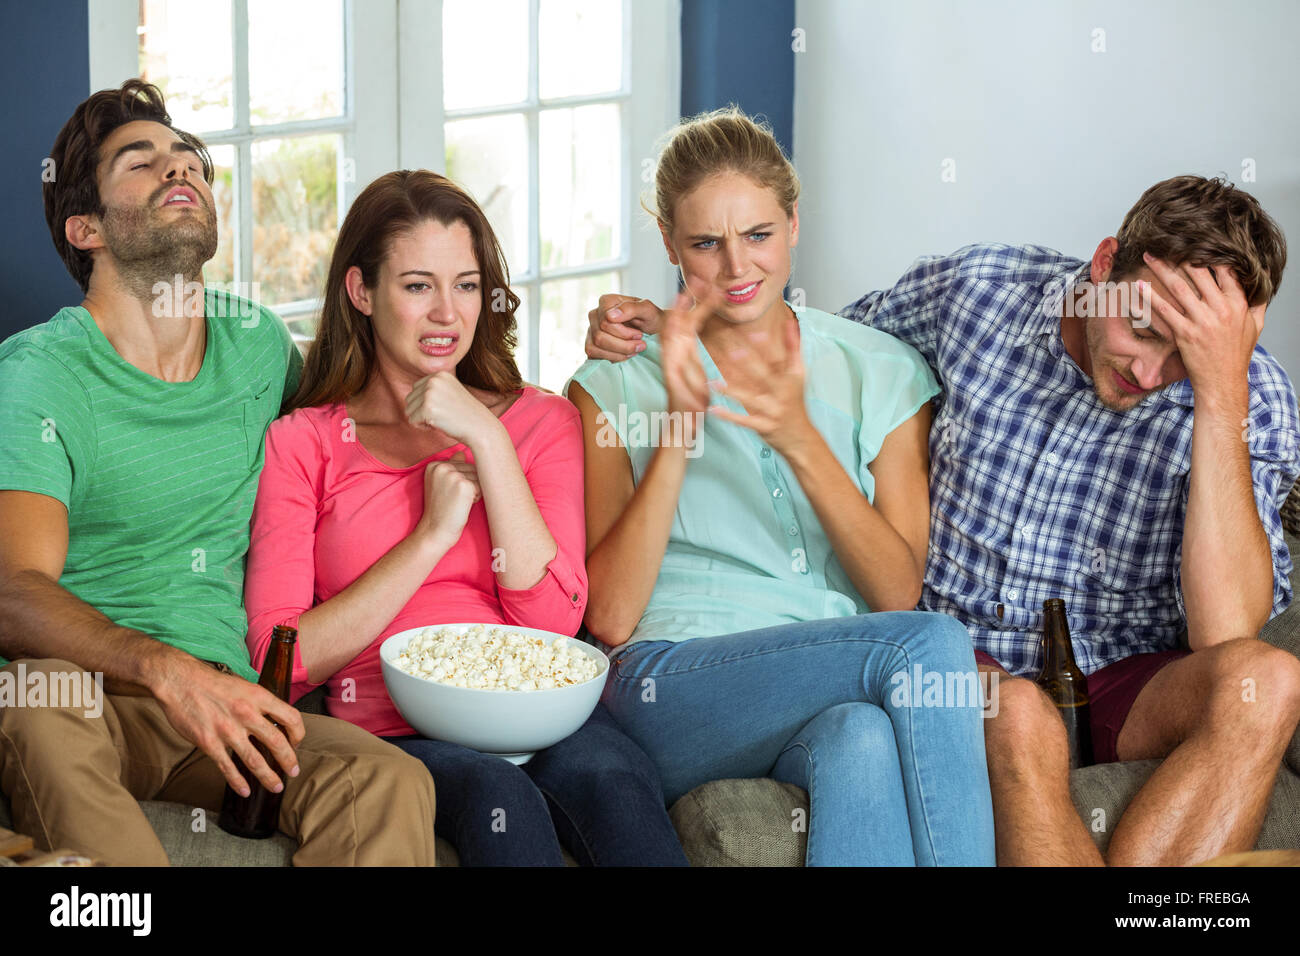 Unhappy friends watching sports match on television Stock Photo